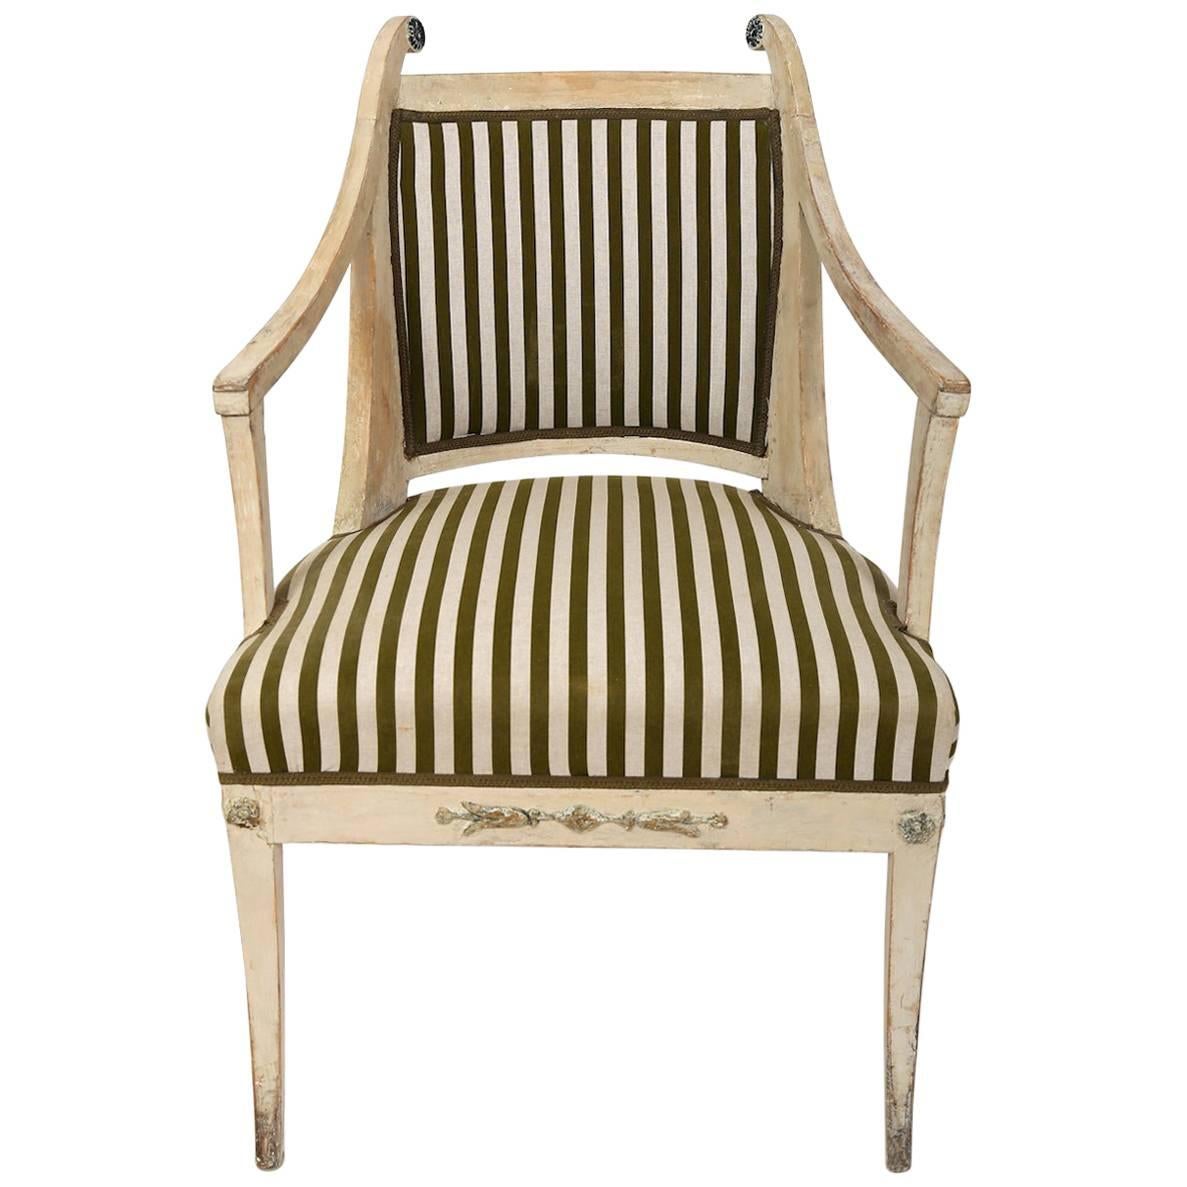 Armchair in the Style of the Royal Chairmaker Ephraim Ståhl, Sweden, 1815 For Sale